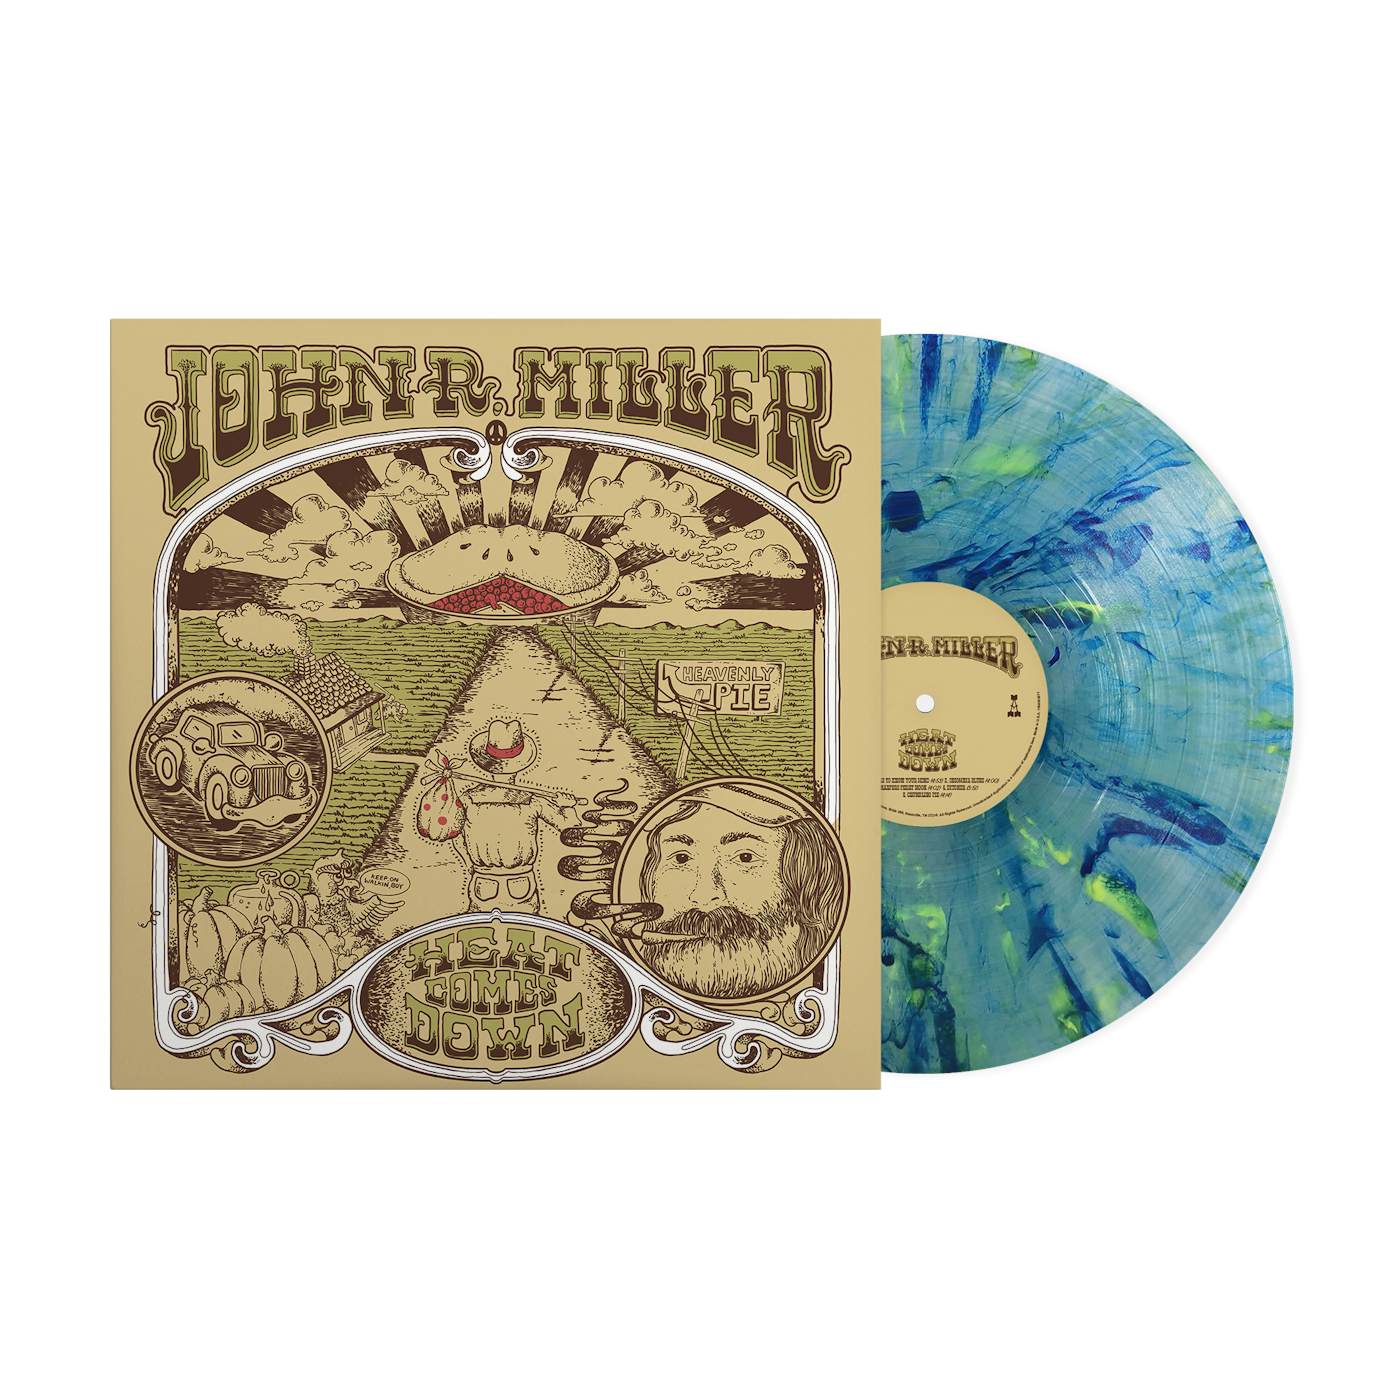 John R. Miller Heat Comes Down Limited Edition "Wormhole" Vinyl